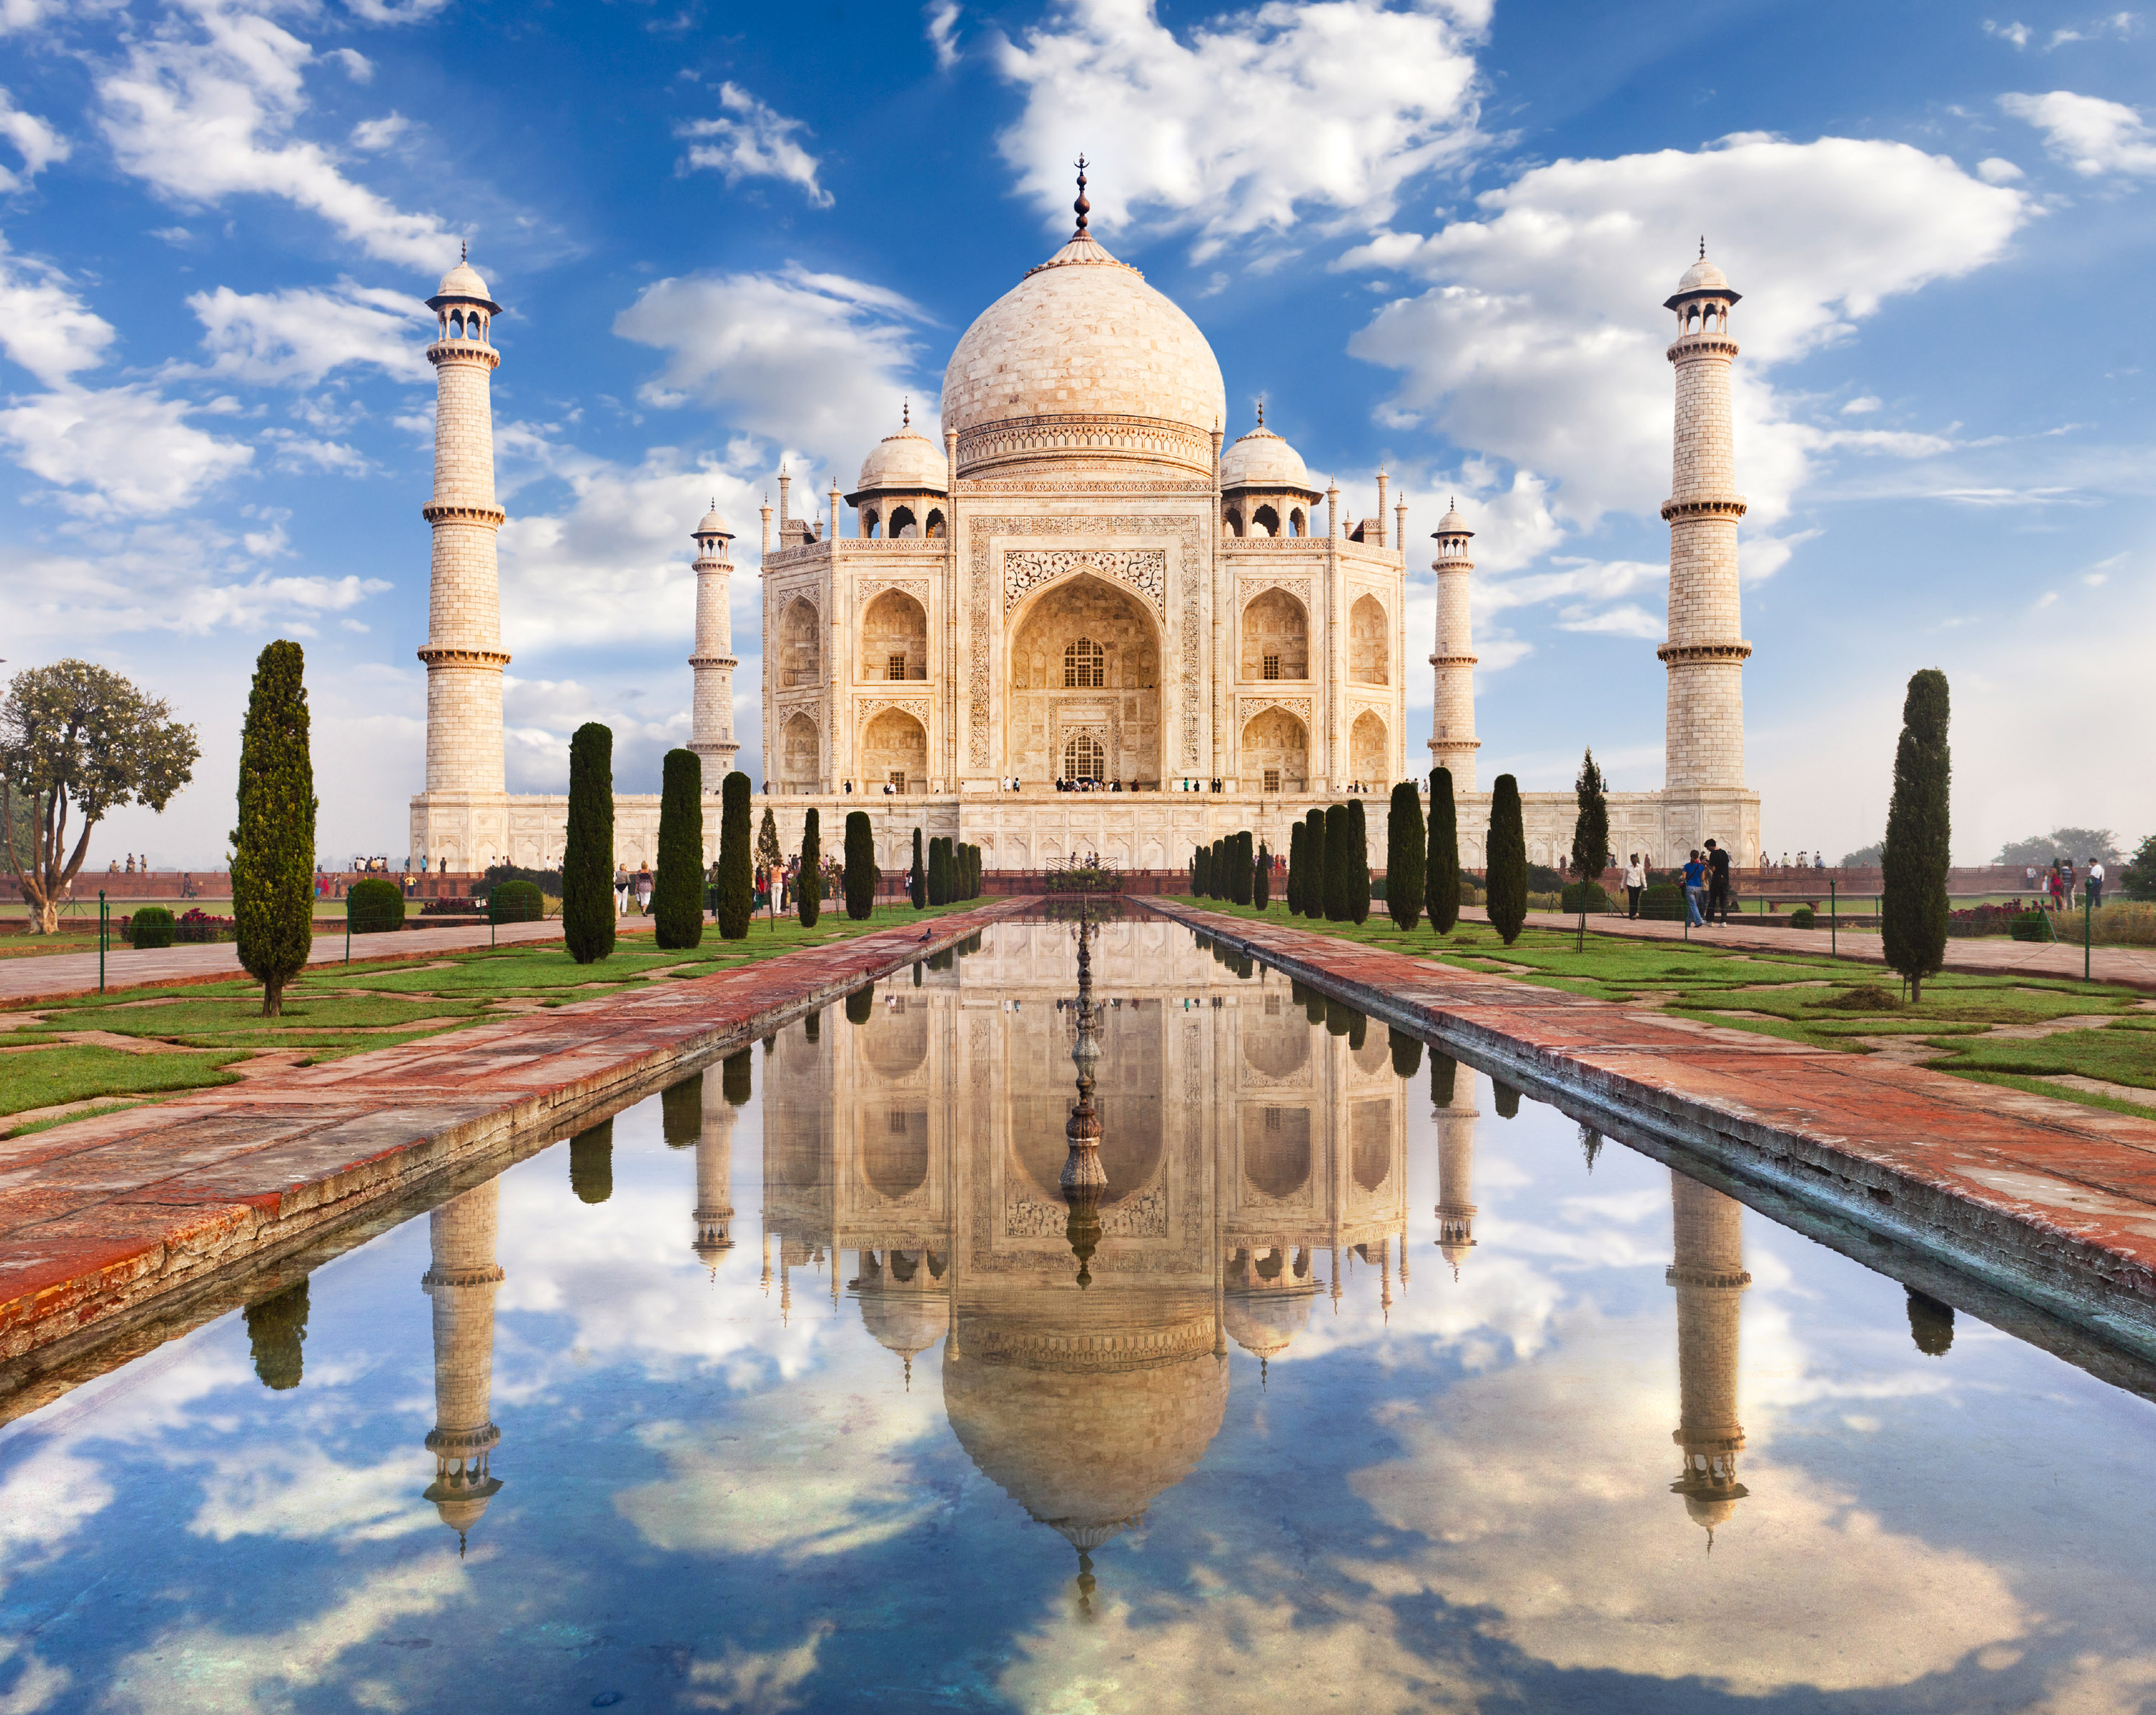 Student Trip & Educational Tour in India | WorldStrides